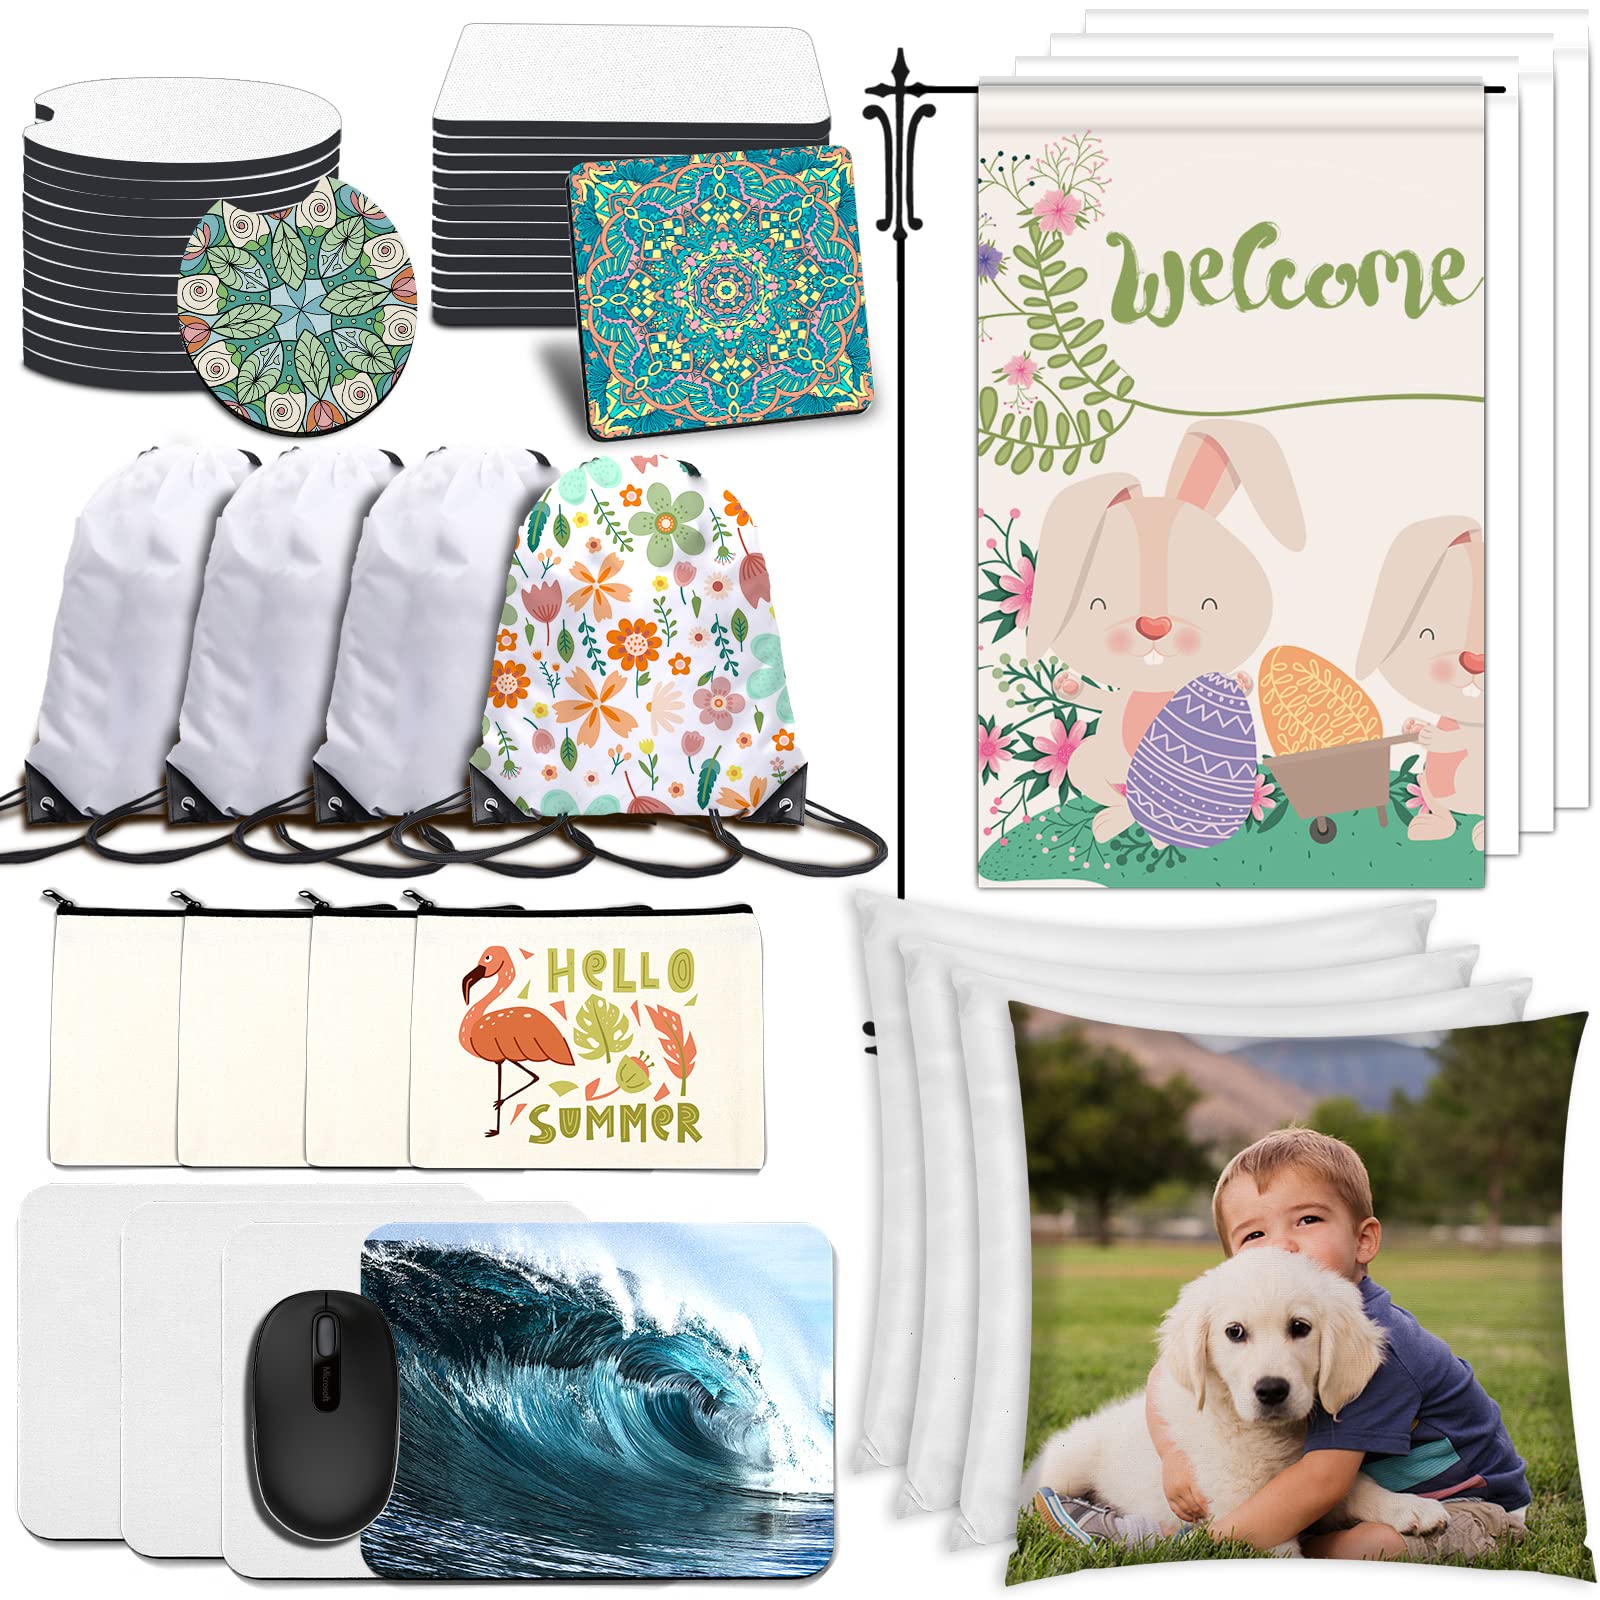 44Pcs Sublimation Blanks Products Set, DIY Sublimation Blanks with Car  Coaster, Mouse Pad, Pillow Covers, Garden Flag, Makeup Bag, Drawstring Bag  for Sublimation Transfer Heat Press Printing Crafts. 44PCS Sublimation  Blanks Set